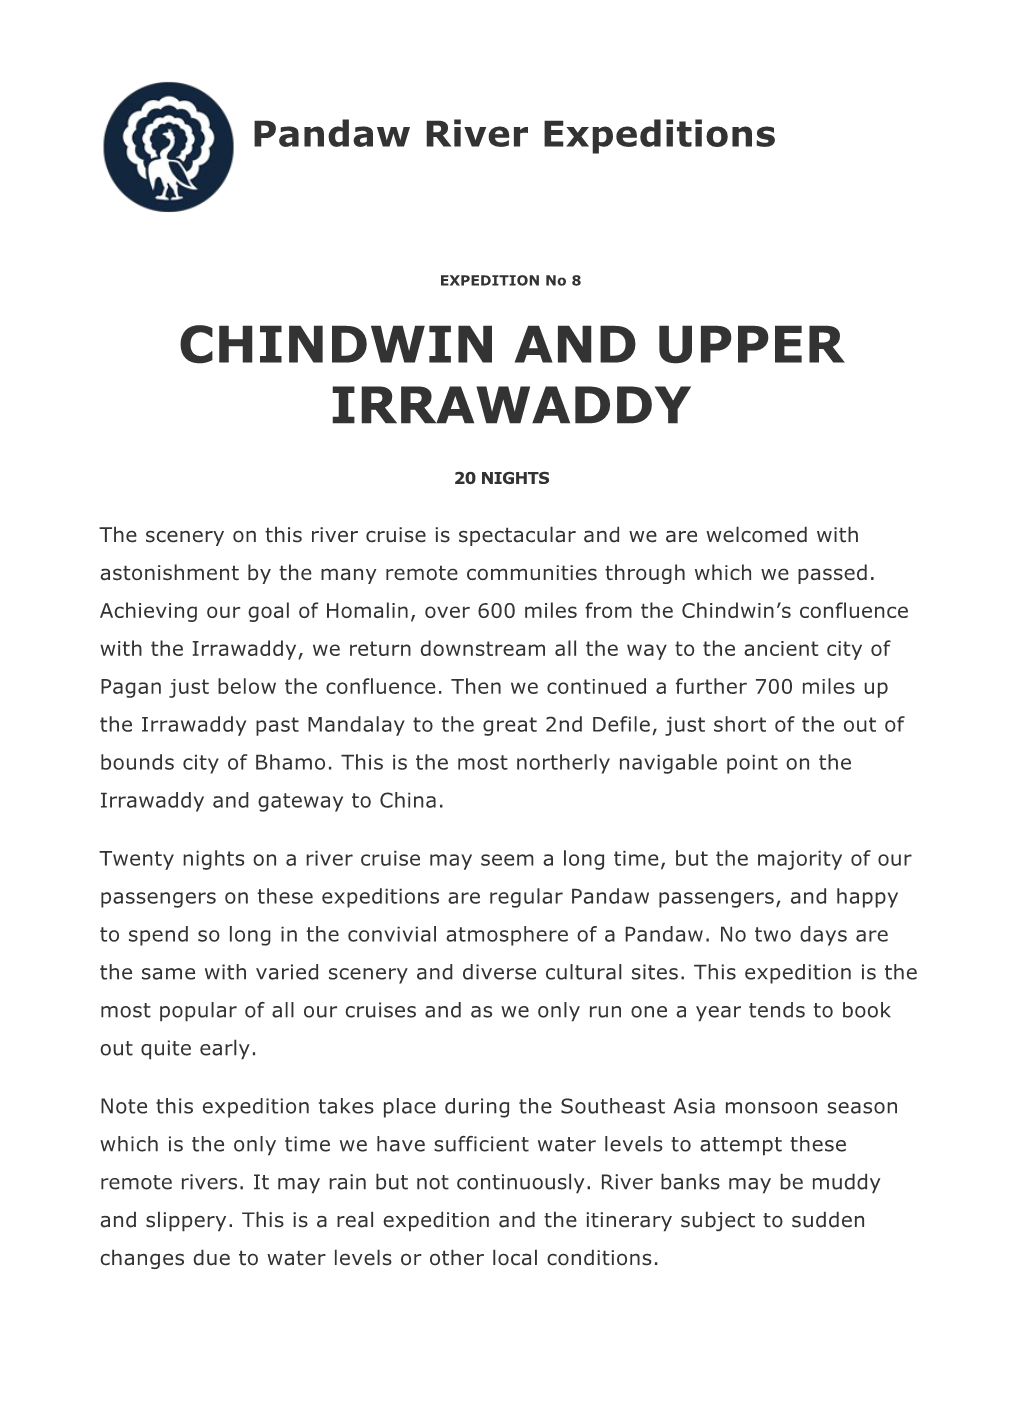 Chindwin and Upper Irrawaddy